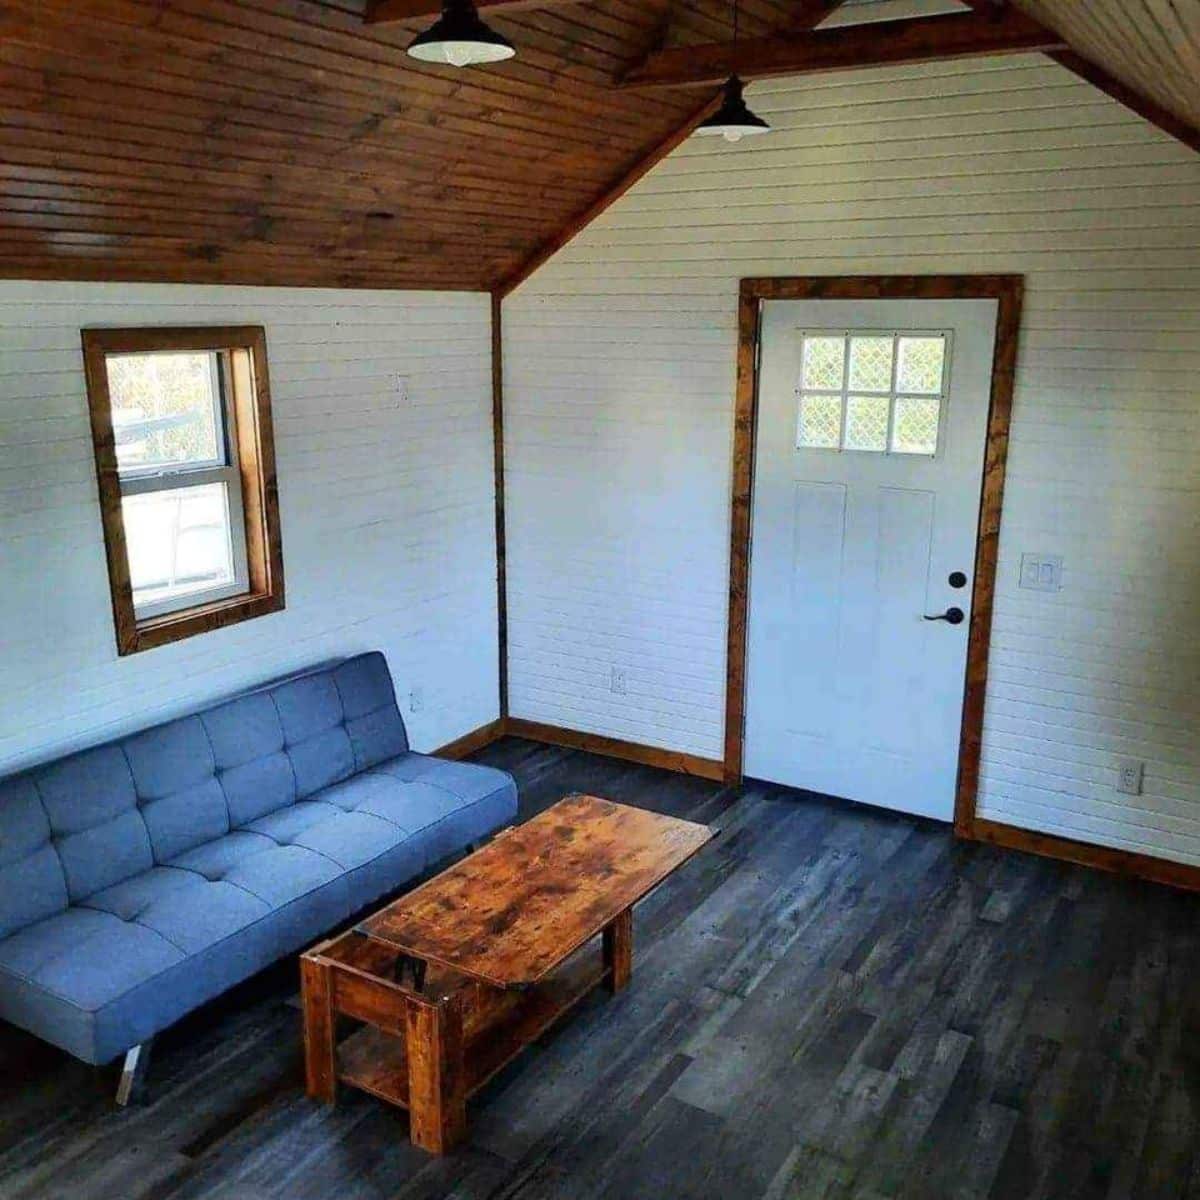 Living area of 24’ Tiny Cabin has a couch and center table